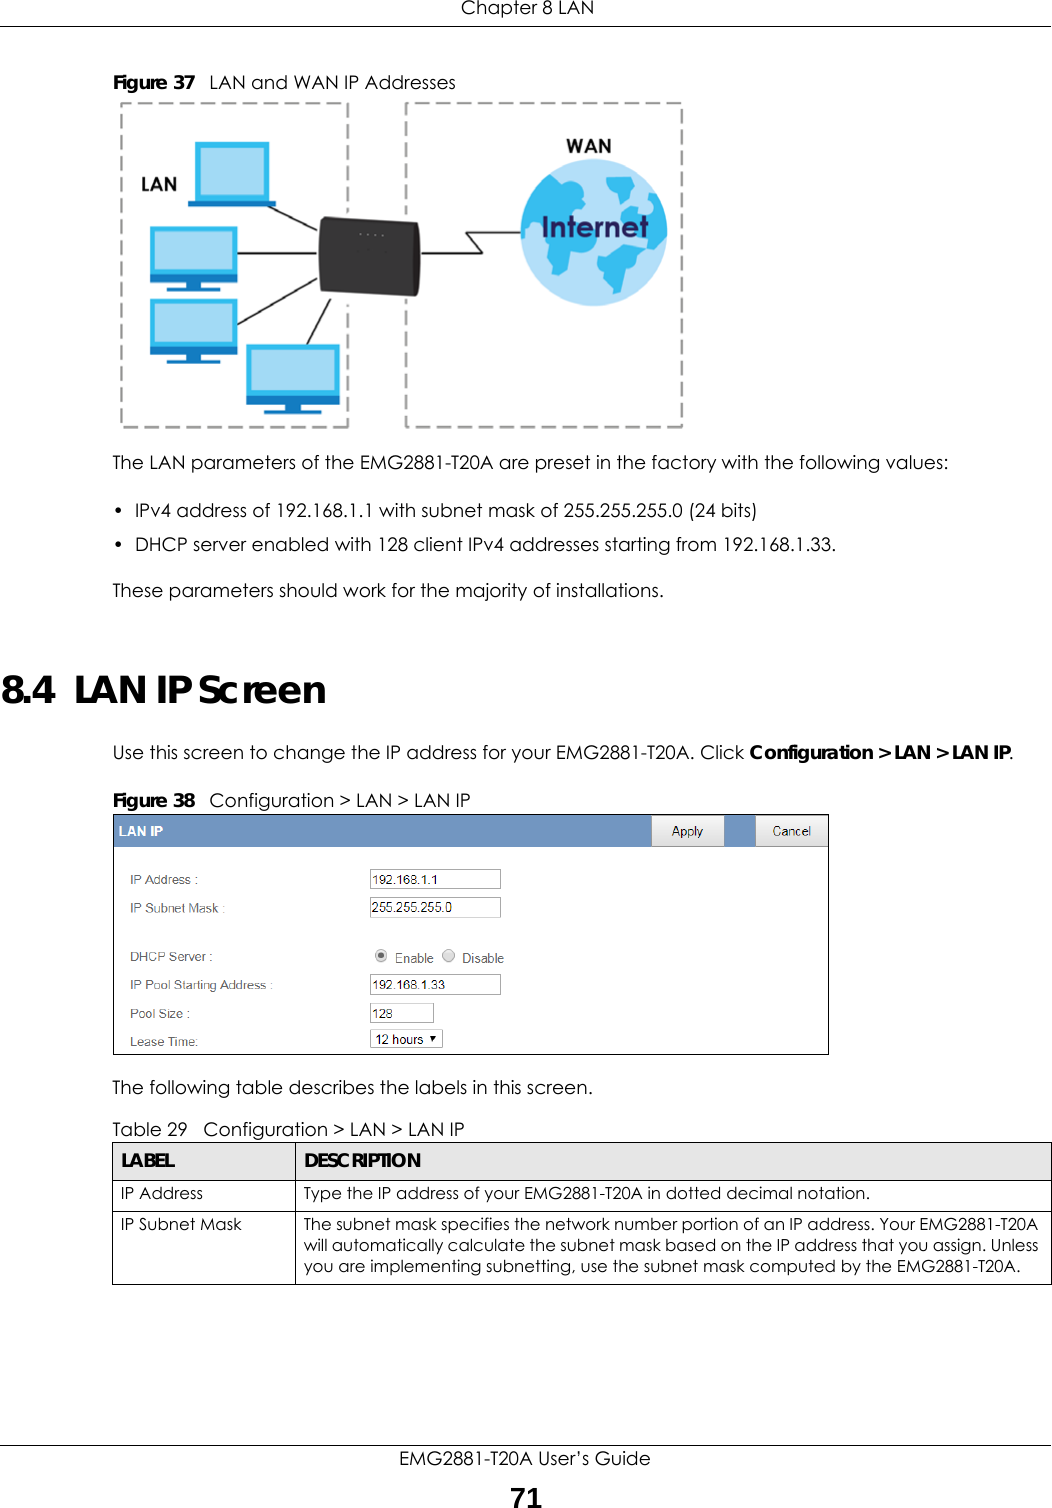  Chapter 8 LANEMG2881-T20A User’s Guide71Figure 37   LAN and WAN IP AddressesThe LAN parameters of the EMG2881-T20A are preset in the factory with the following values:• IPv4 address of 192.168.1.1 with subnet mask of 255.255.255.0 (24 bits)• DHCP server enabled with 128 client IPv4 addresses starting from 192.168.1.33. These parameters should work for the majority of installations.8.4  LAN IP ScreenUse this screen to change the IP address for your EMG2881-T20A. Click Configuration &gt; LAN &gt; LAN IP.Figure 38   Configuration &gt; LAN &gt; LAN IP The following table describes the labels in this screen.Table 29   Configuration &gt; LAN &gt; LAN IPLABEL DESCRIPTIONIP Address Type the IP address of your EMG2881-T20A in dotted decimal notation.IP Subnet Mask The subnet mask specifies the network number portion of an IP address. Your EMG2881-T20A will automatically calculate the subnet mask based on the IP address that you assign. Unless you are implementing subnetting, use the subnet mask computed by the EMG2881-T20A.